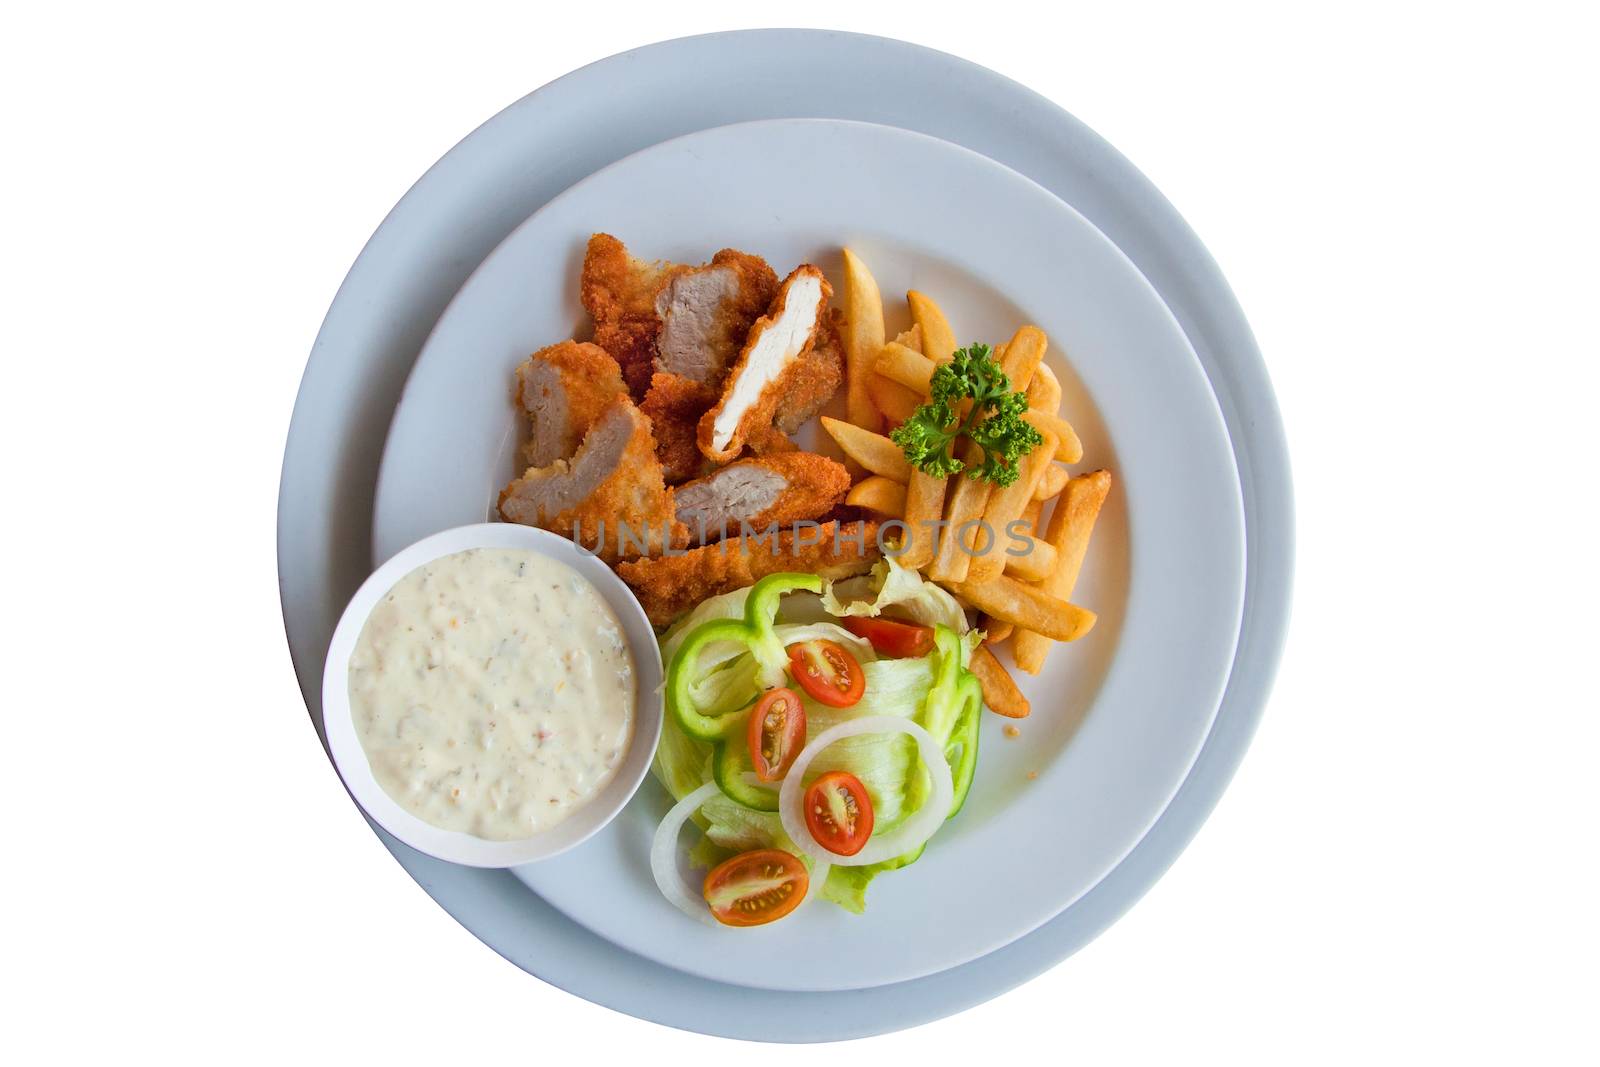 Chicken strips and fries combo on white background by nopparats